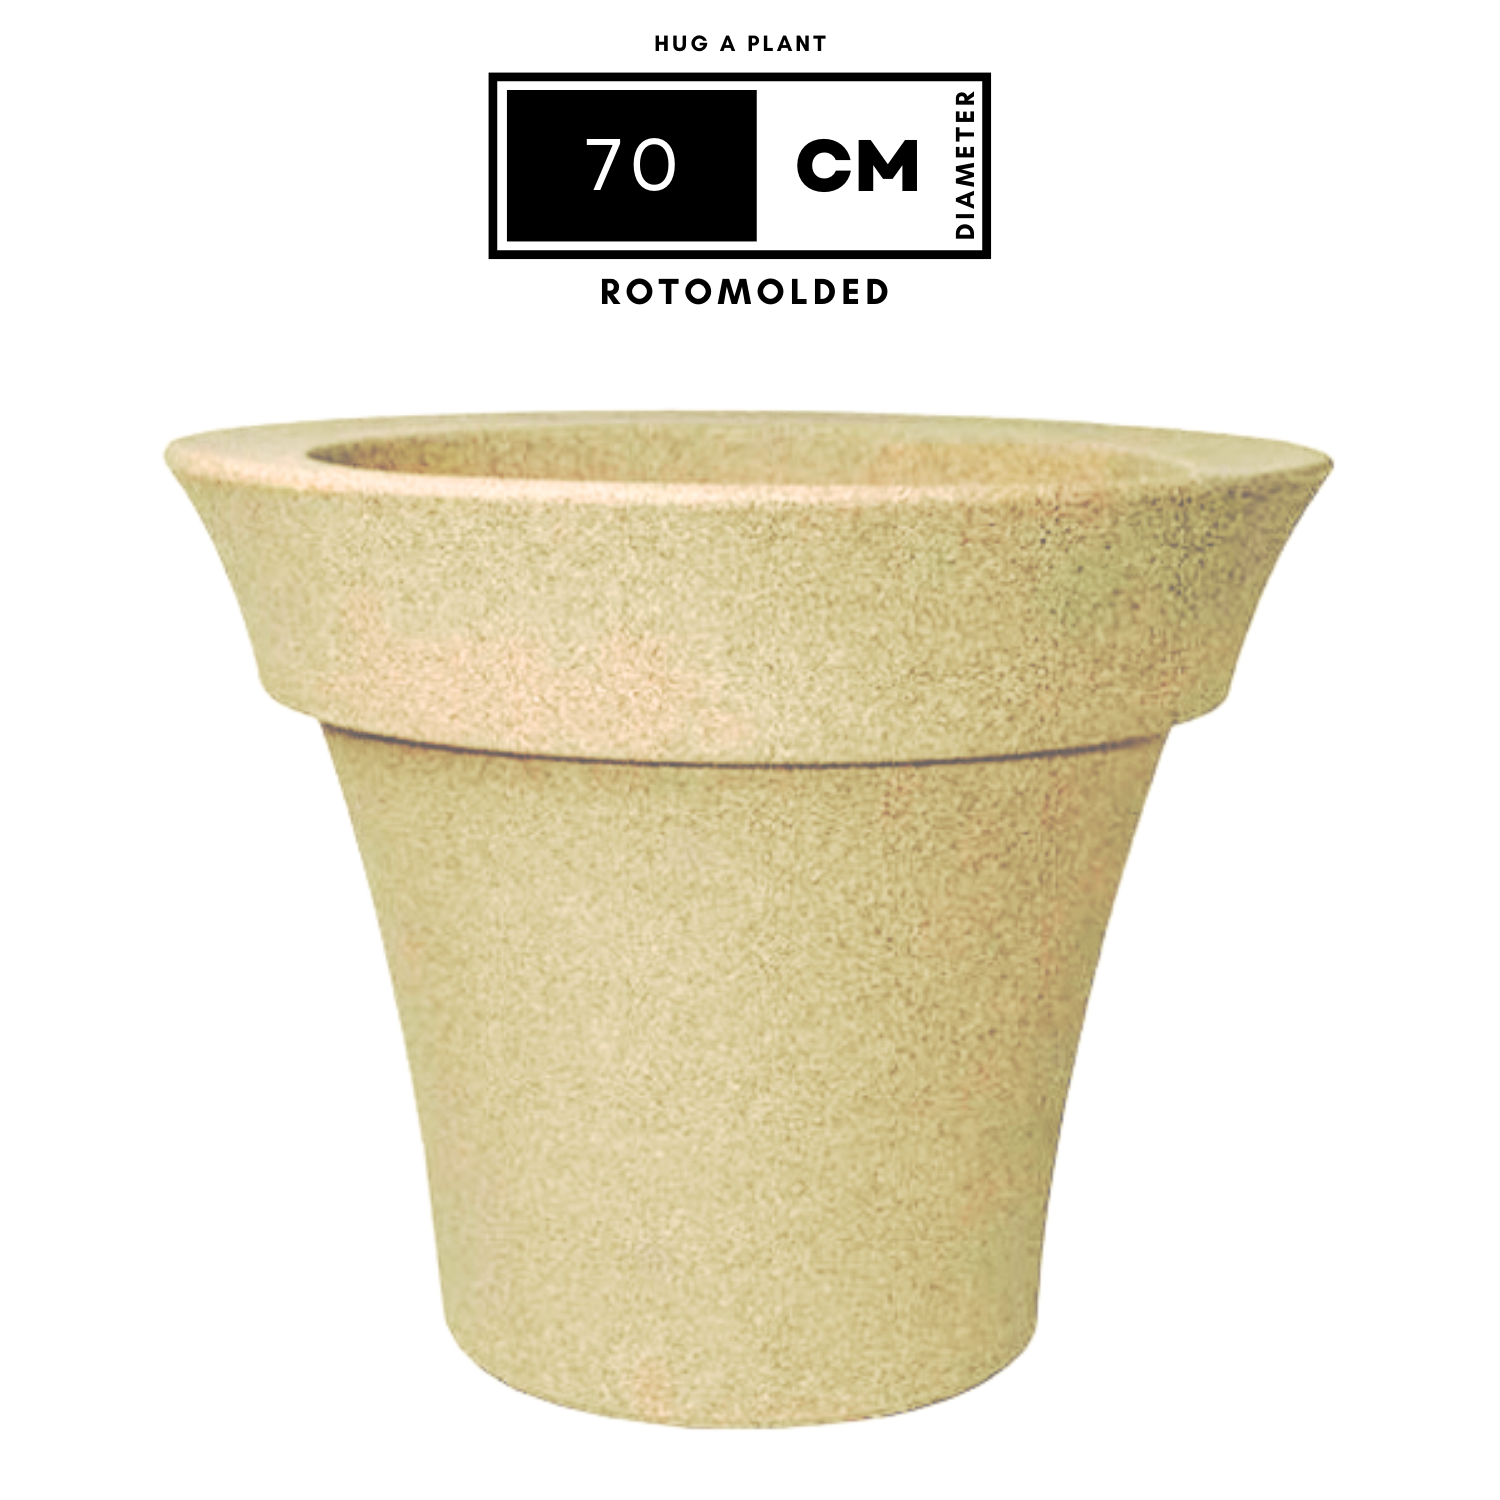 Hug A Plant | Classic Planter Rotomolded Round Plastic Pot for Home & Garden (Pack of 1, Cream Stone Finish)